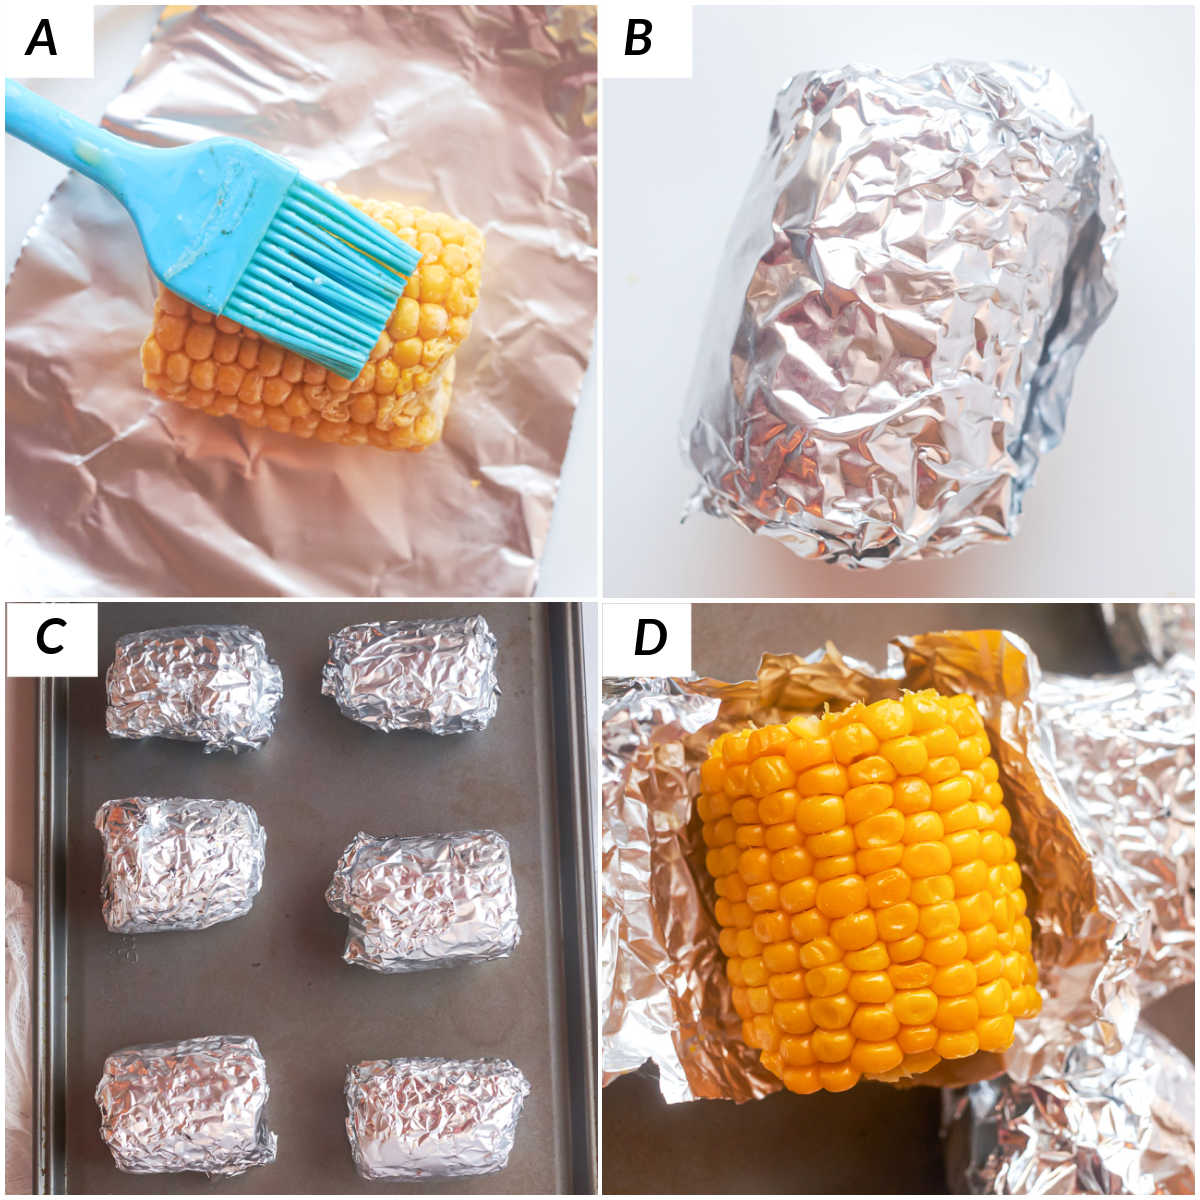 Image collage showing the steps to make corn on the cob of the oven